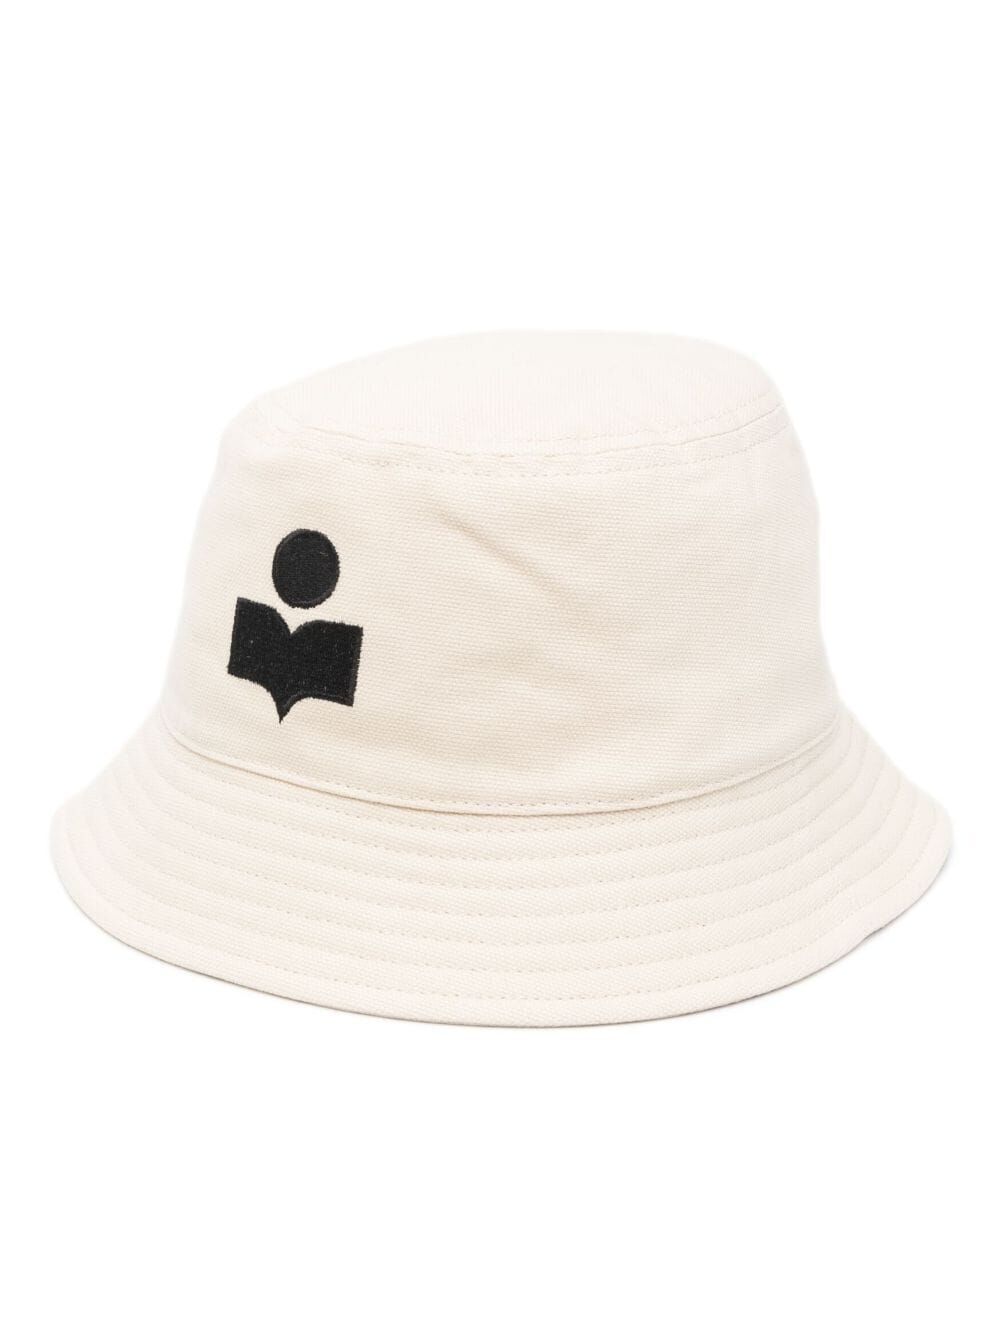 Marant Haley Hat In Neutrals